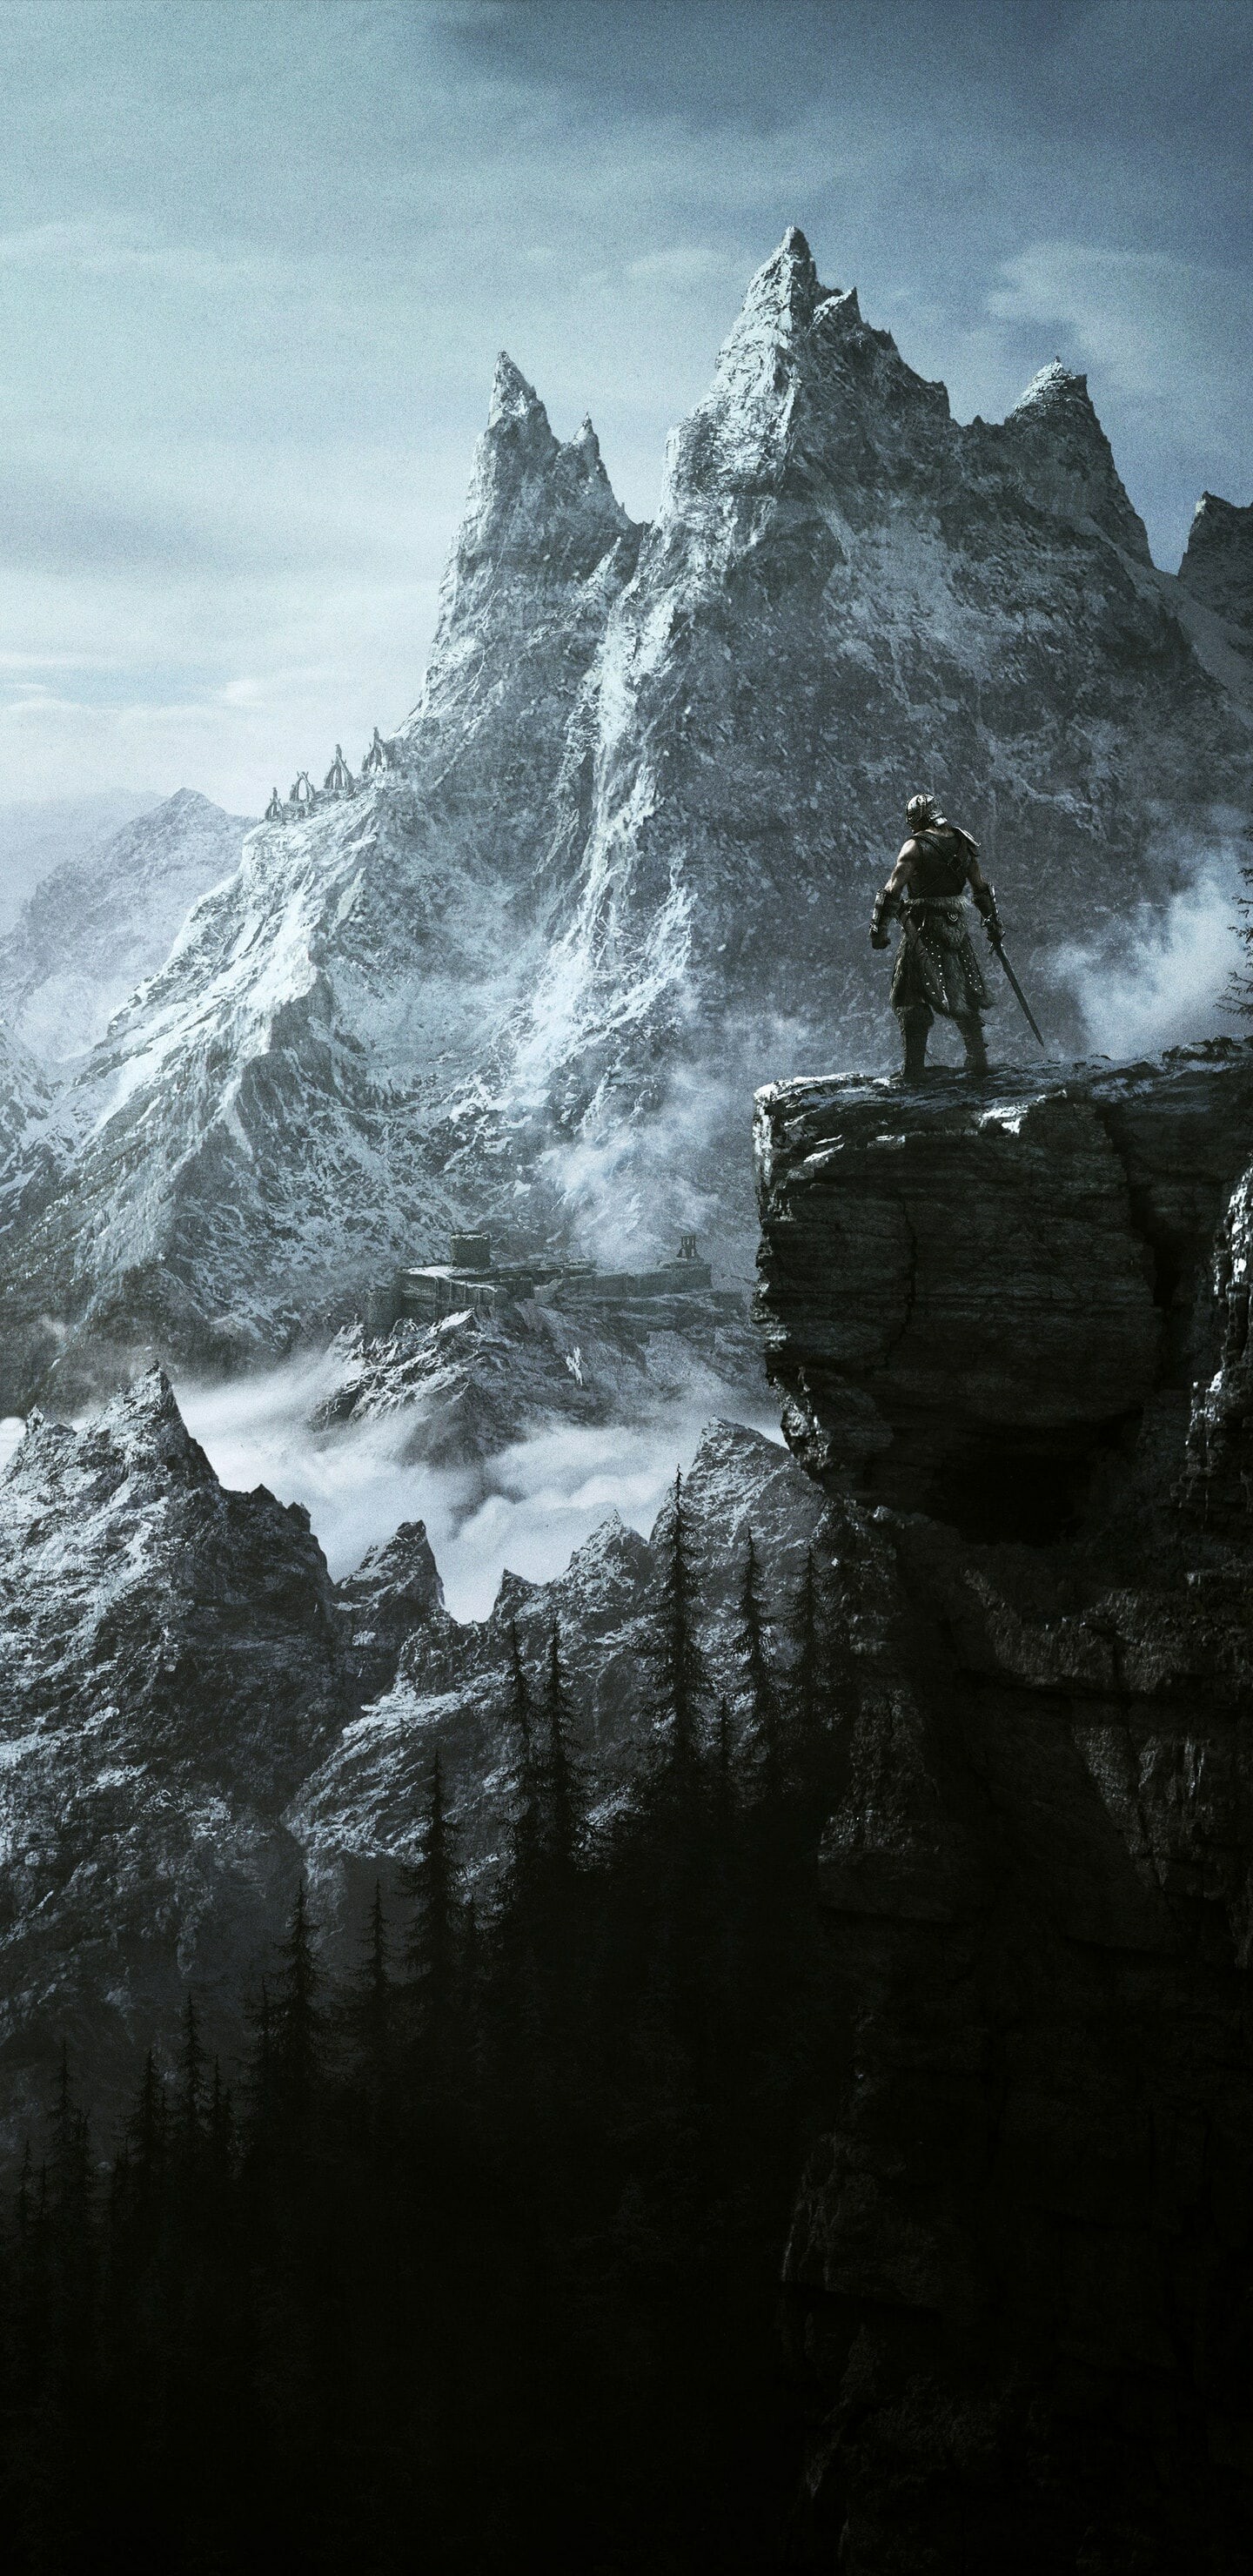 Skyrim: The follow-up to the 2006 Game of the Year, The Elder Scrolls IV: Oblivion. 1440x2960 HD Background.